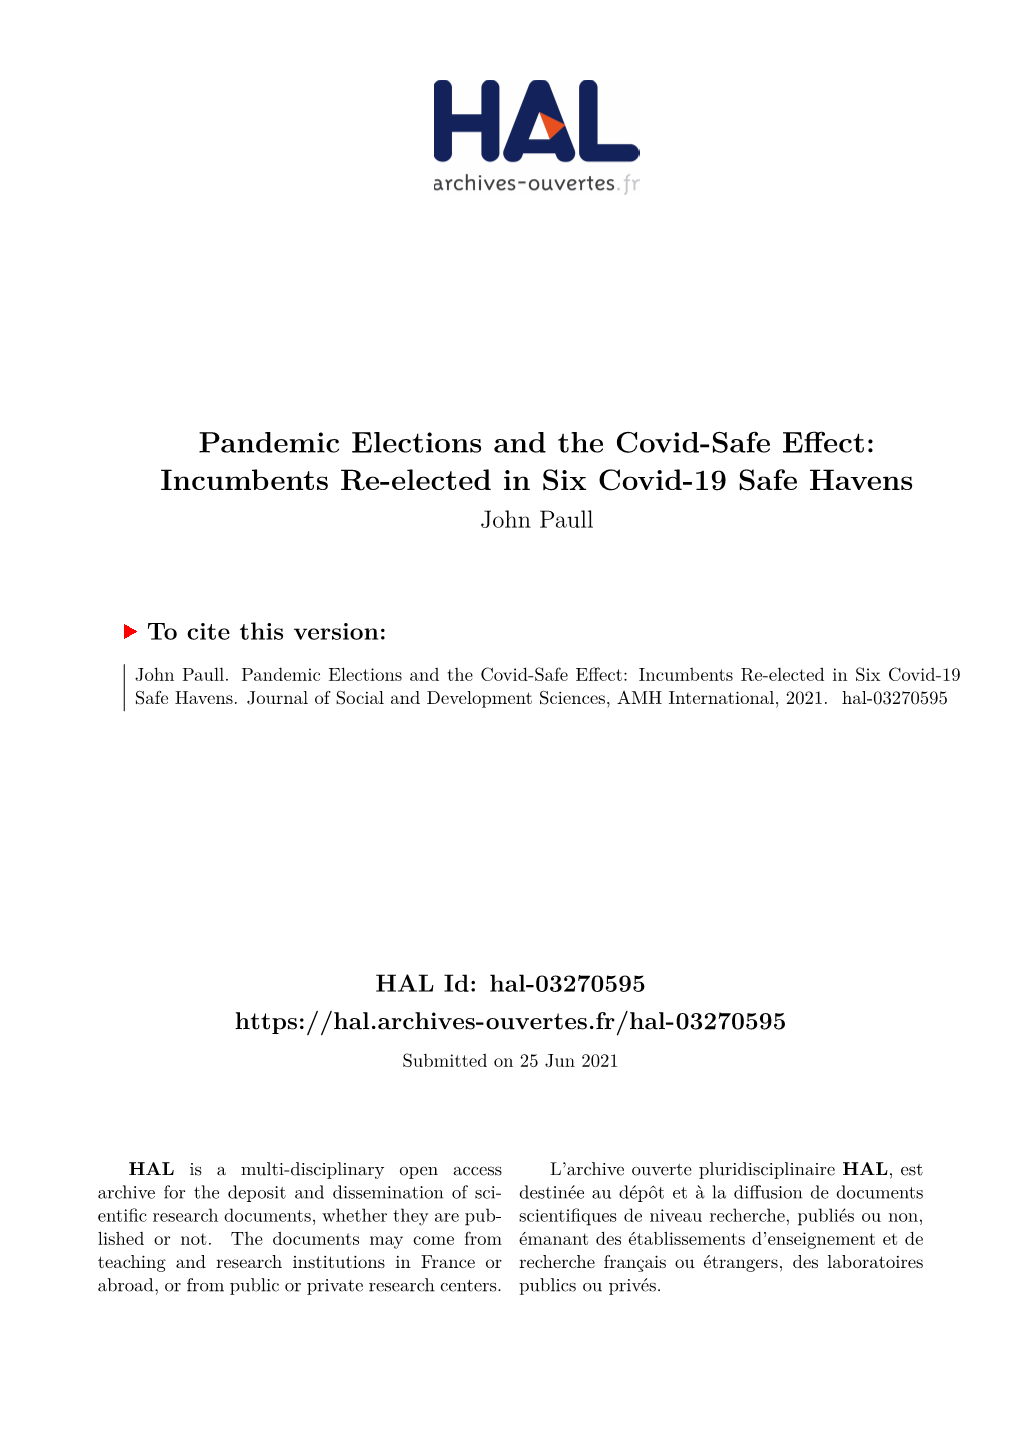 Pandemic Elections and the Covid-Safe Effect: Incumbents Re-Elected in Six Covid-19 Safe Havens John Paull